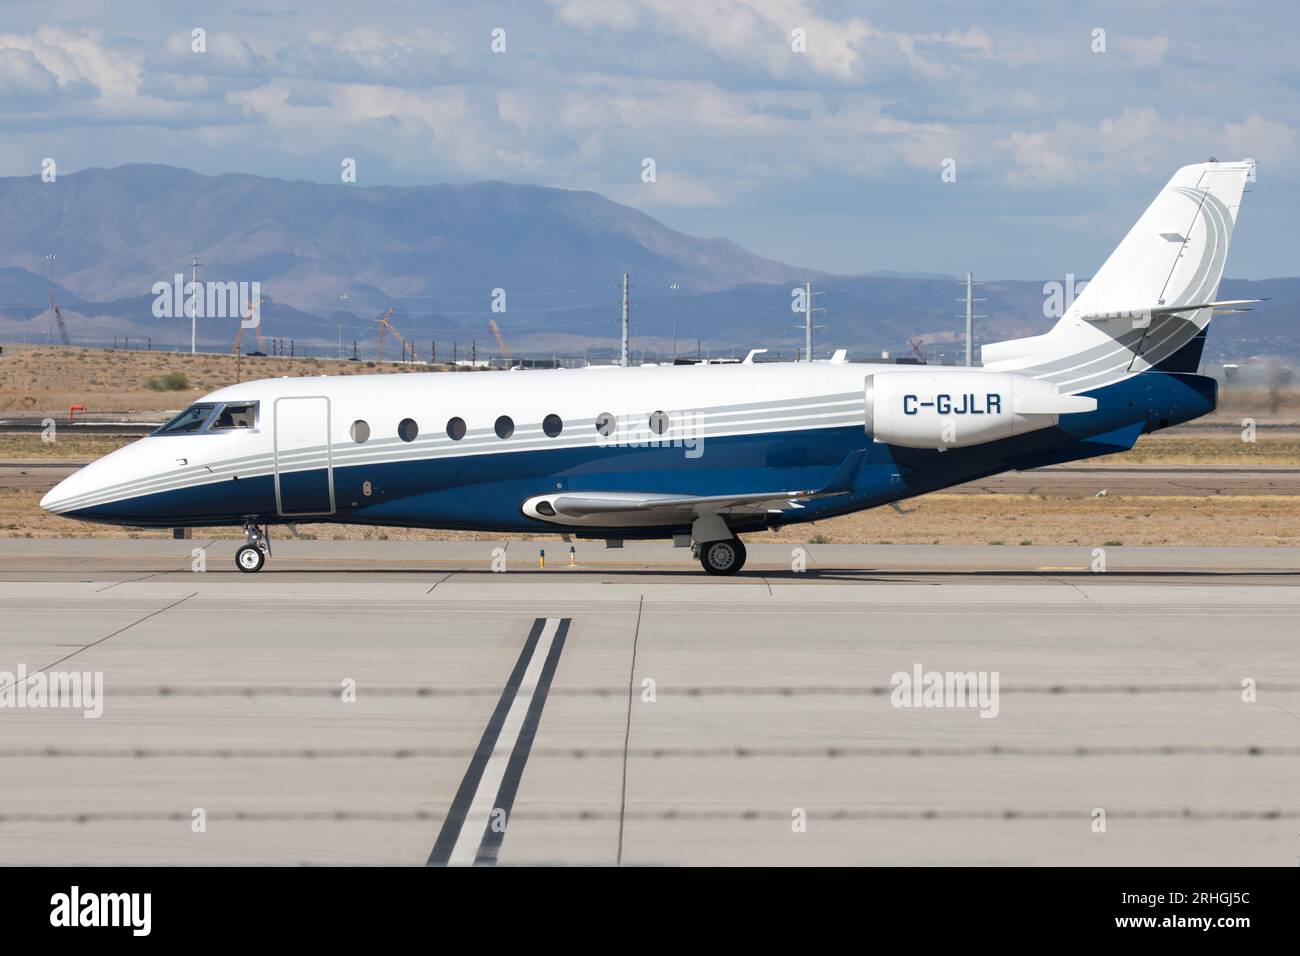 A twin engine Gulfstream G200 business jet (C-GJLR) taxiing at the Mesa Gateway Airport after landing from Toronto, Canada. Stock Photo